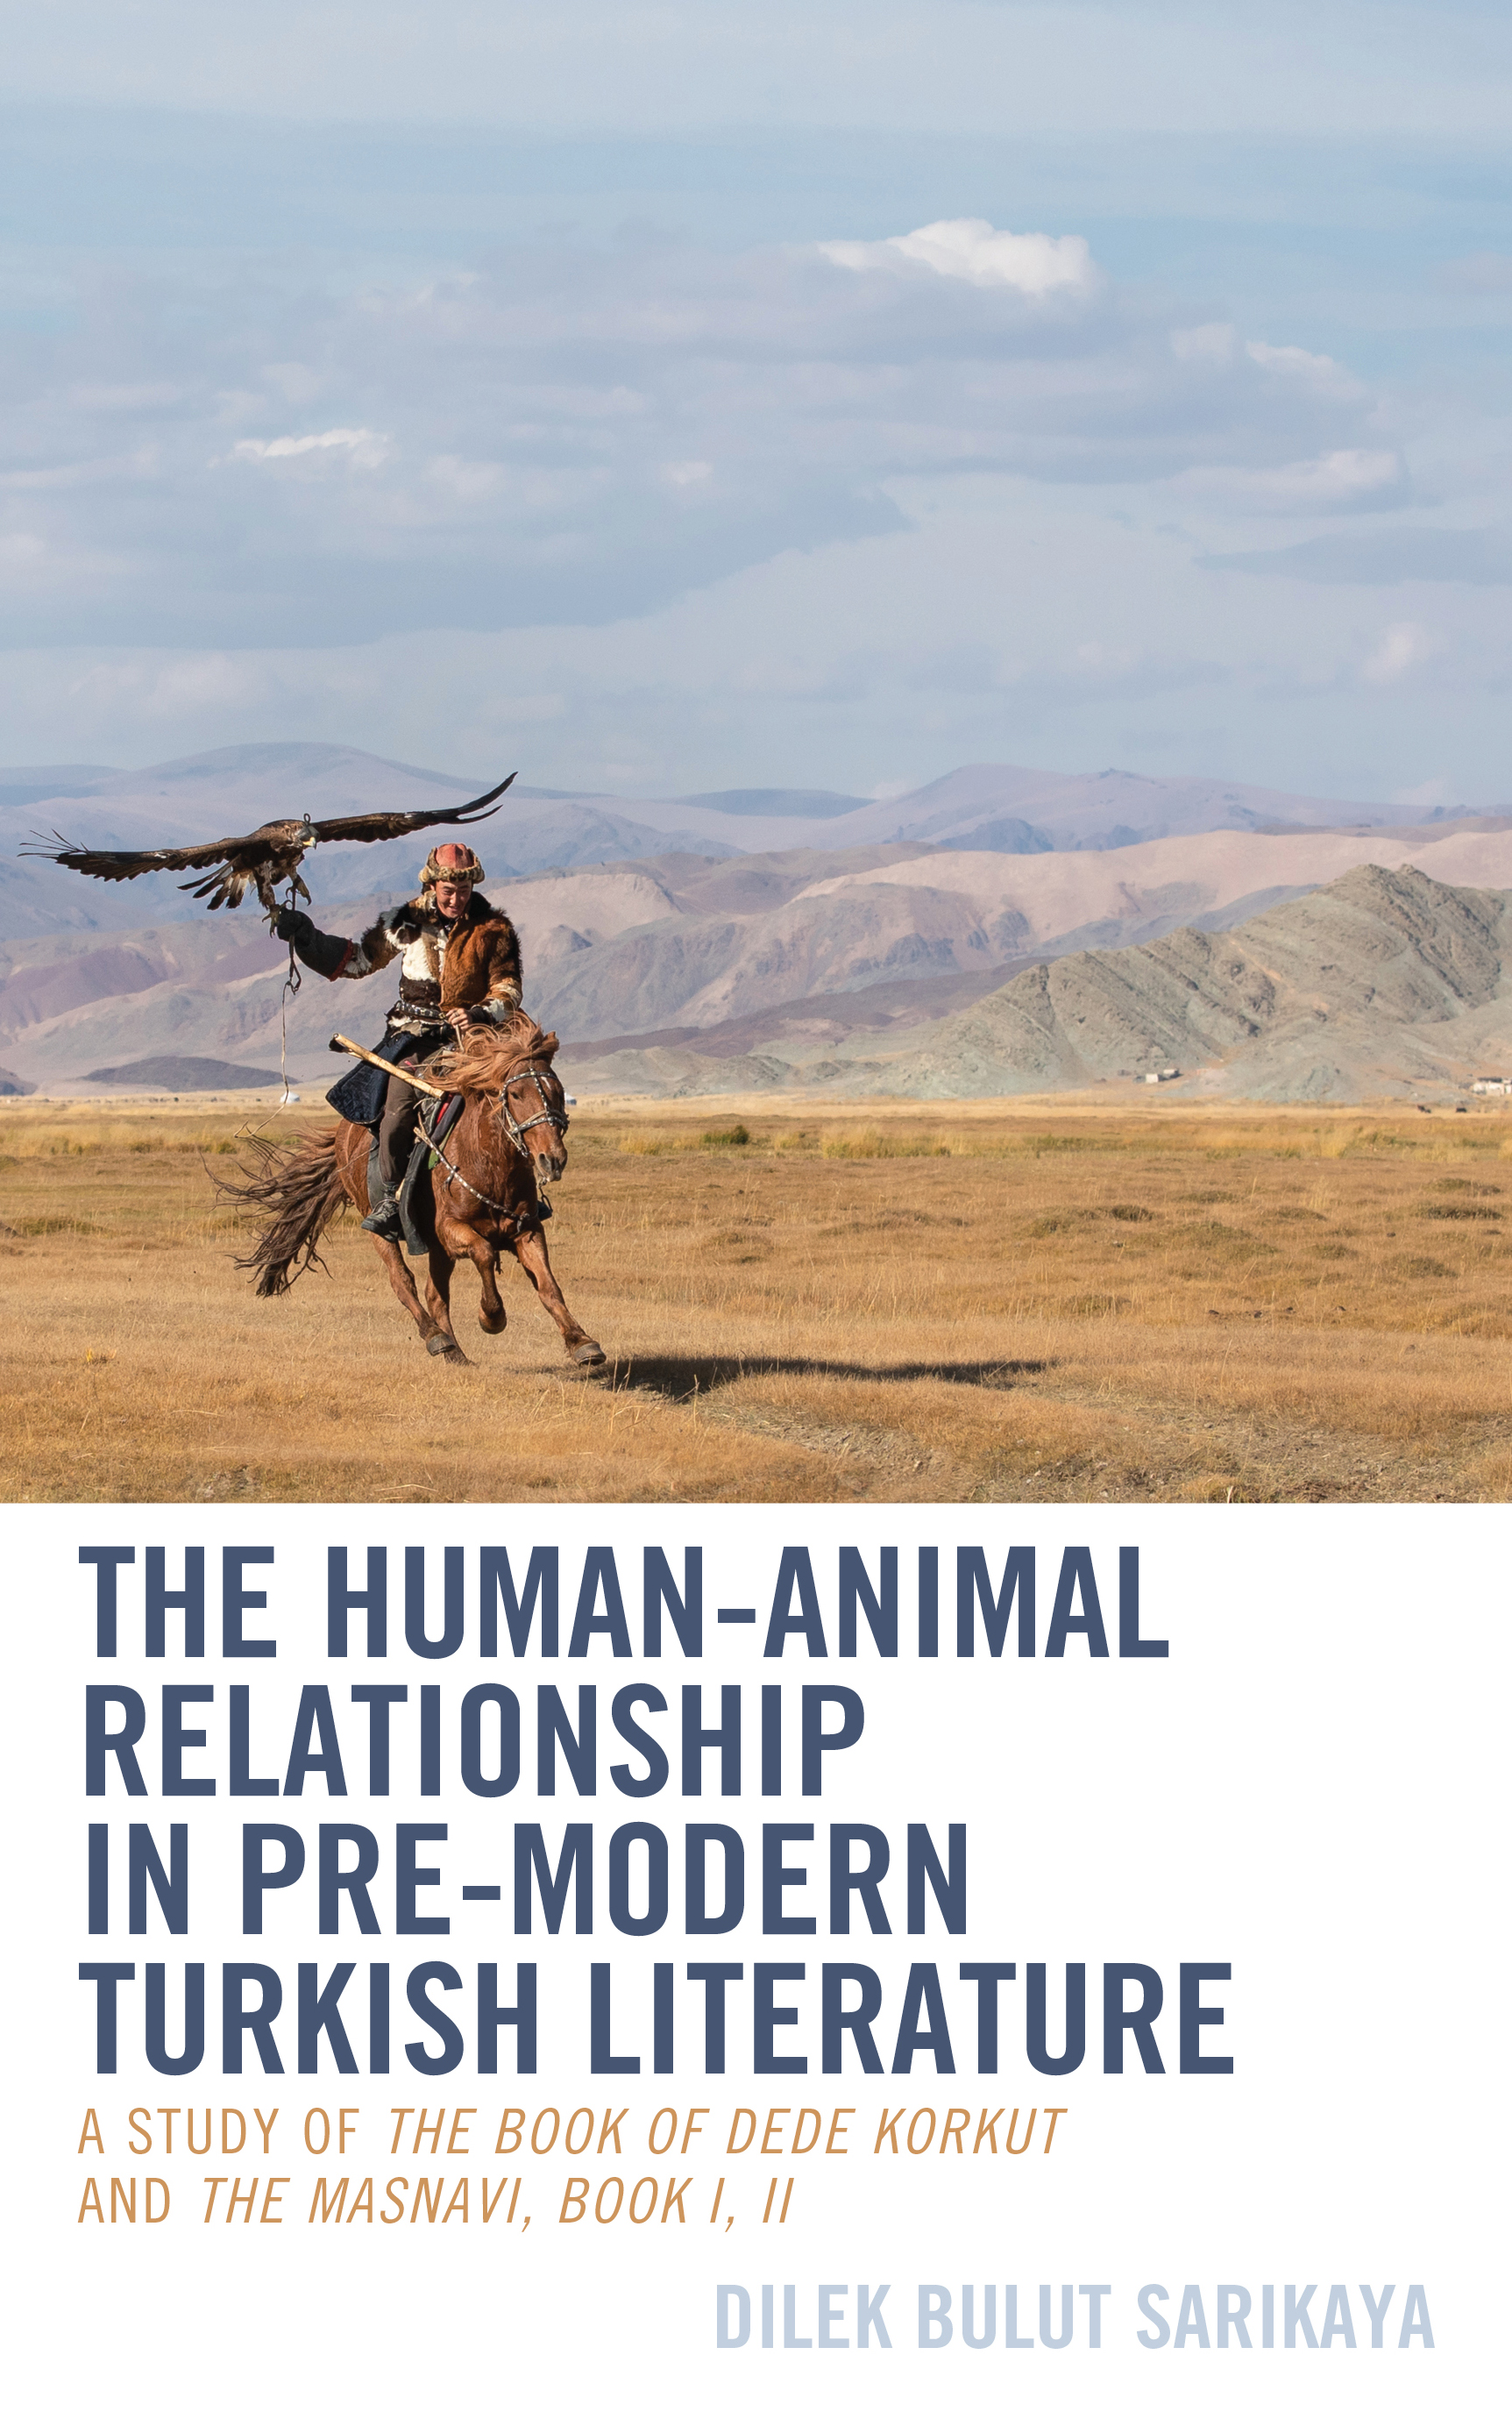 The Human-Animal Relationship in Pre-Modern Turkish Literature: A Study of The Book of Dede Korkut and The Masnavi, Book I, II